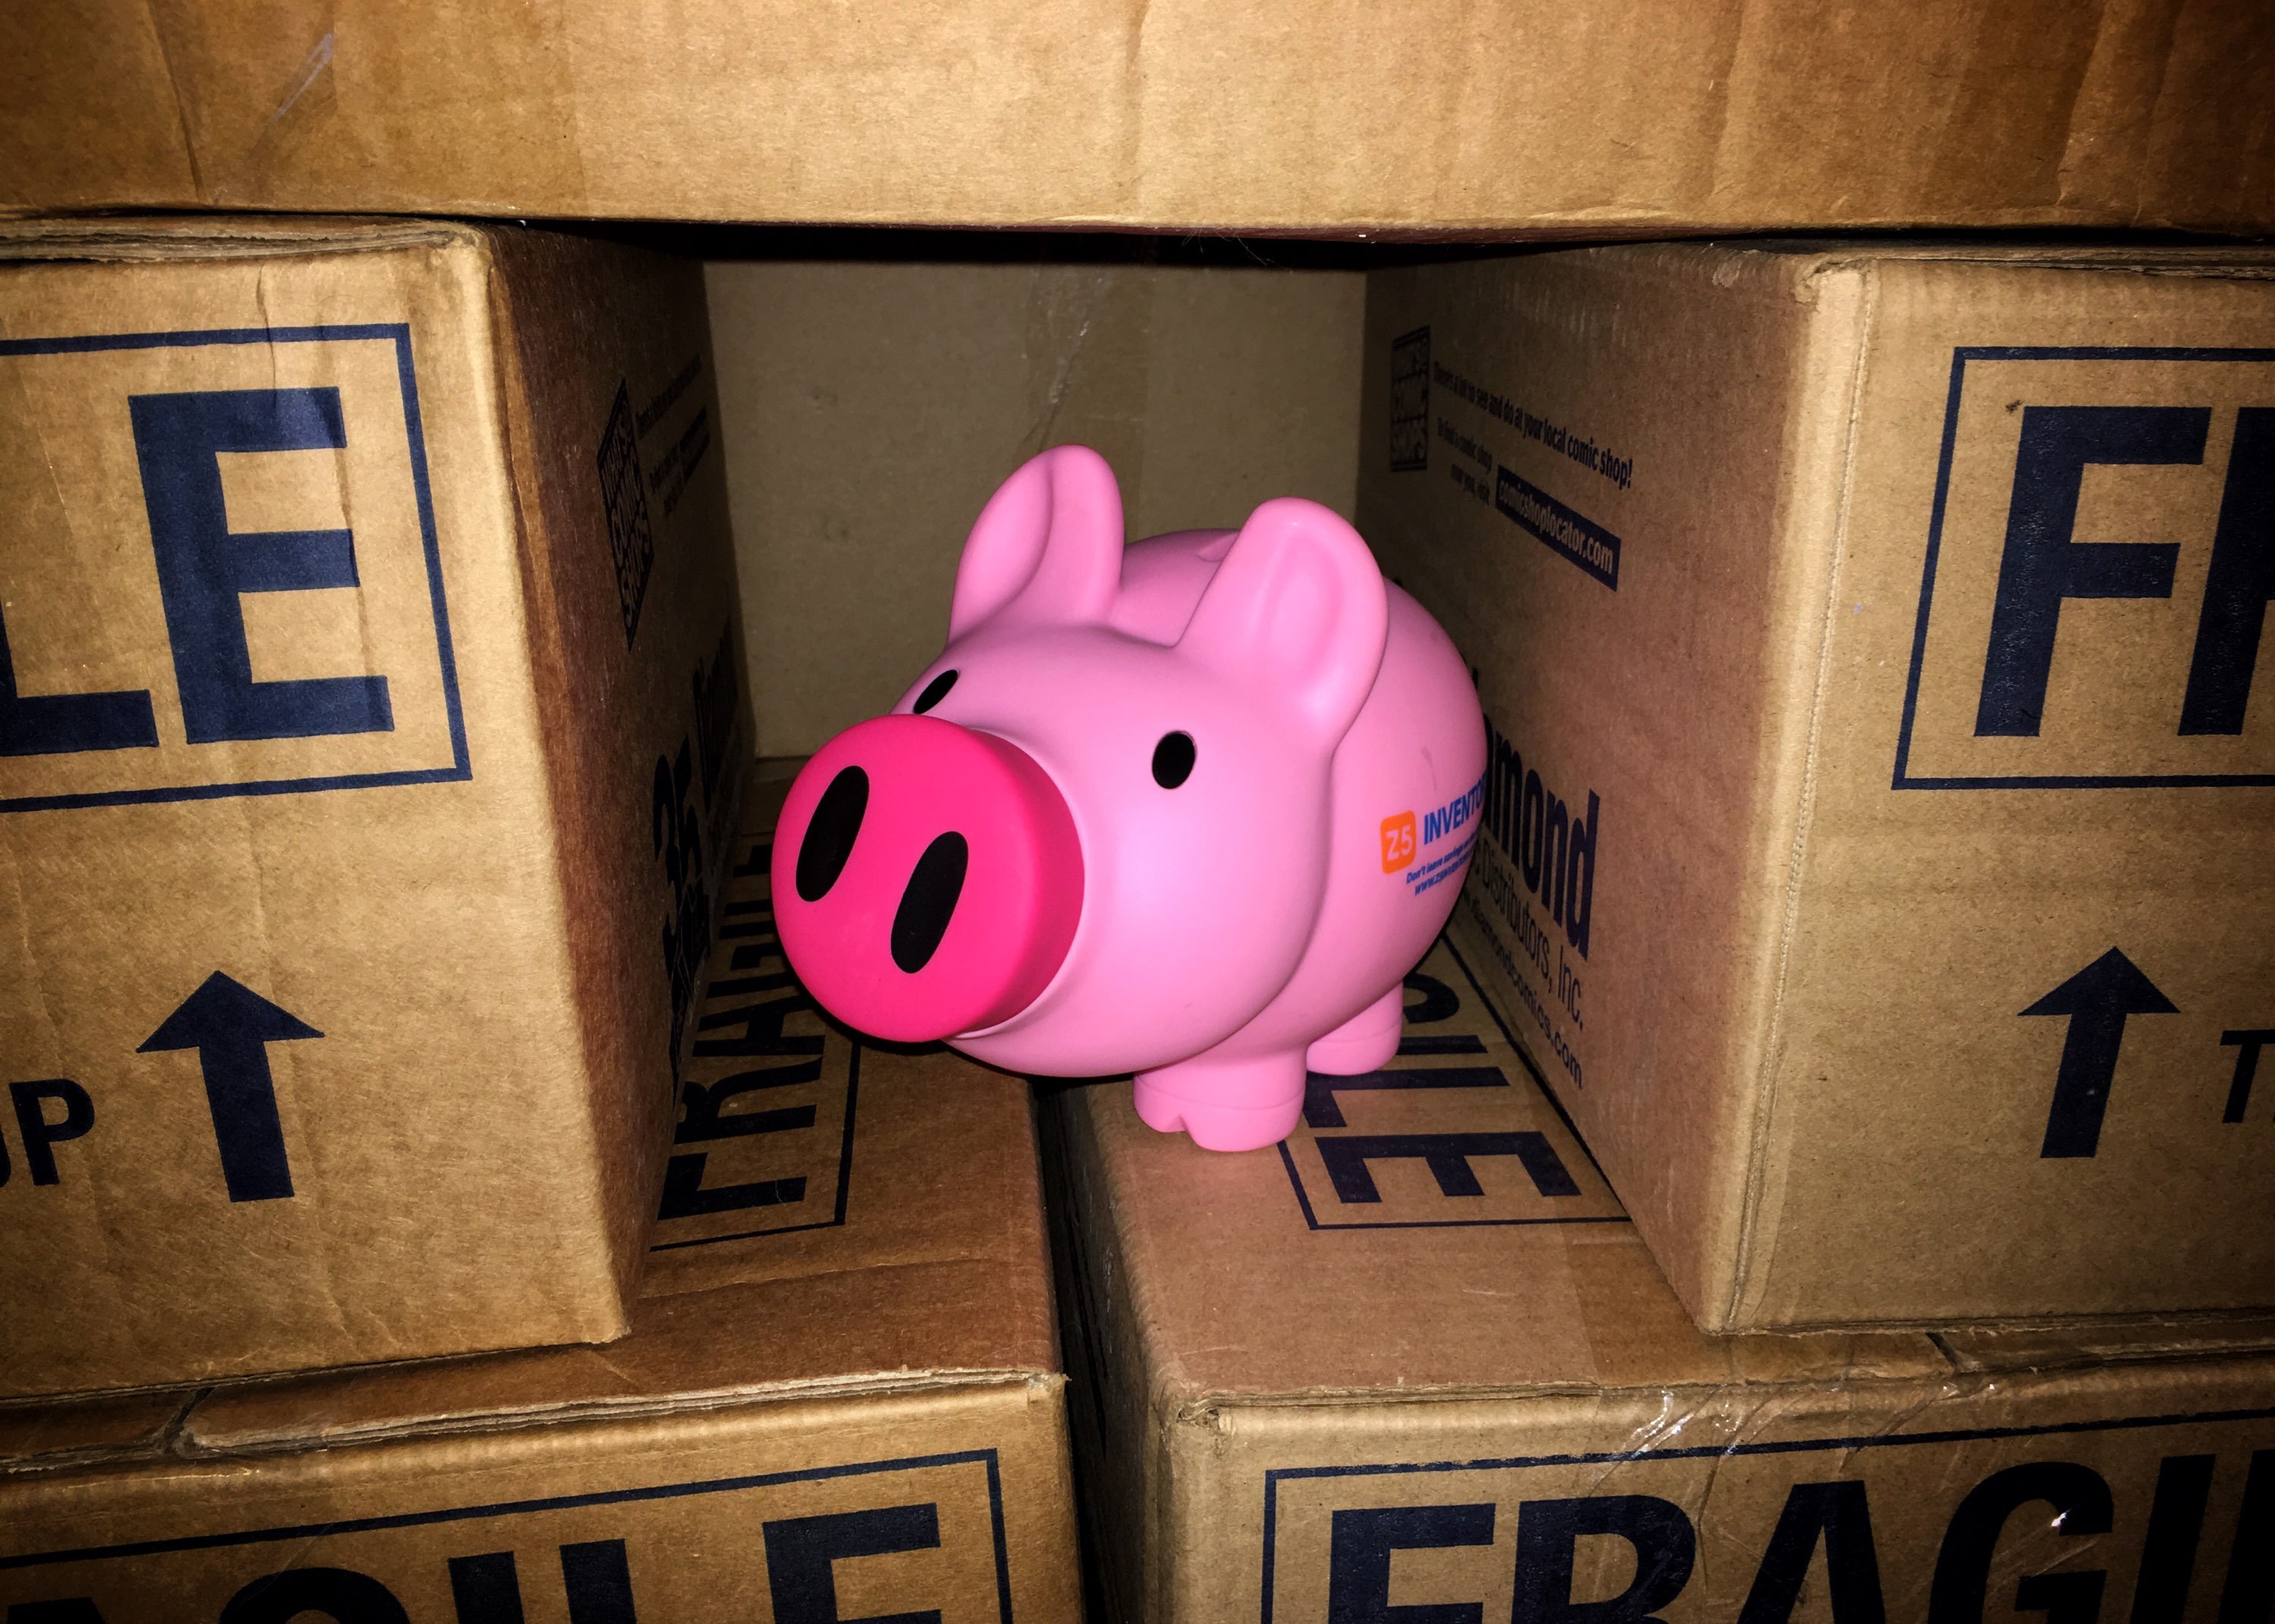 The Z5 piggy bank is surrounded by Amazon shipping boxes.